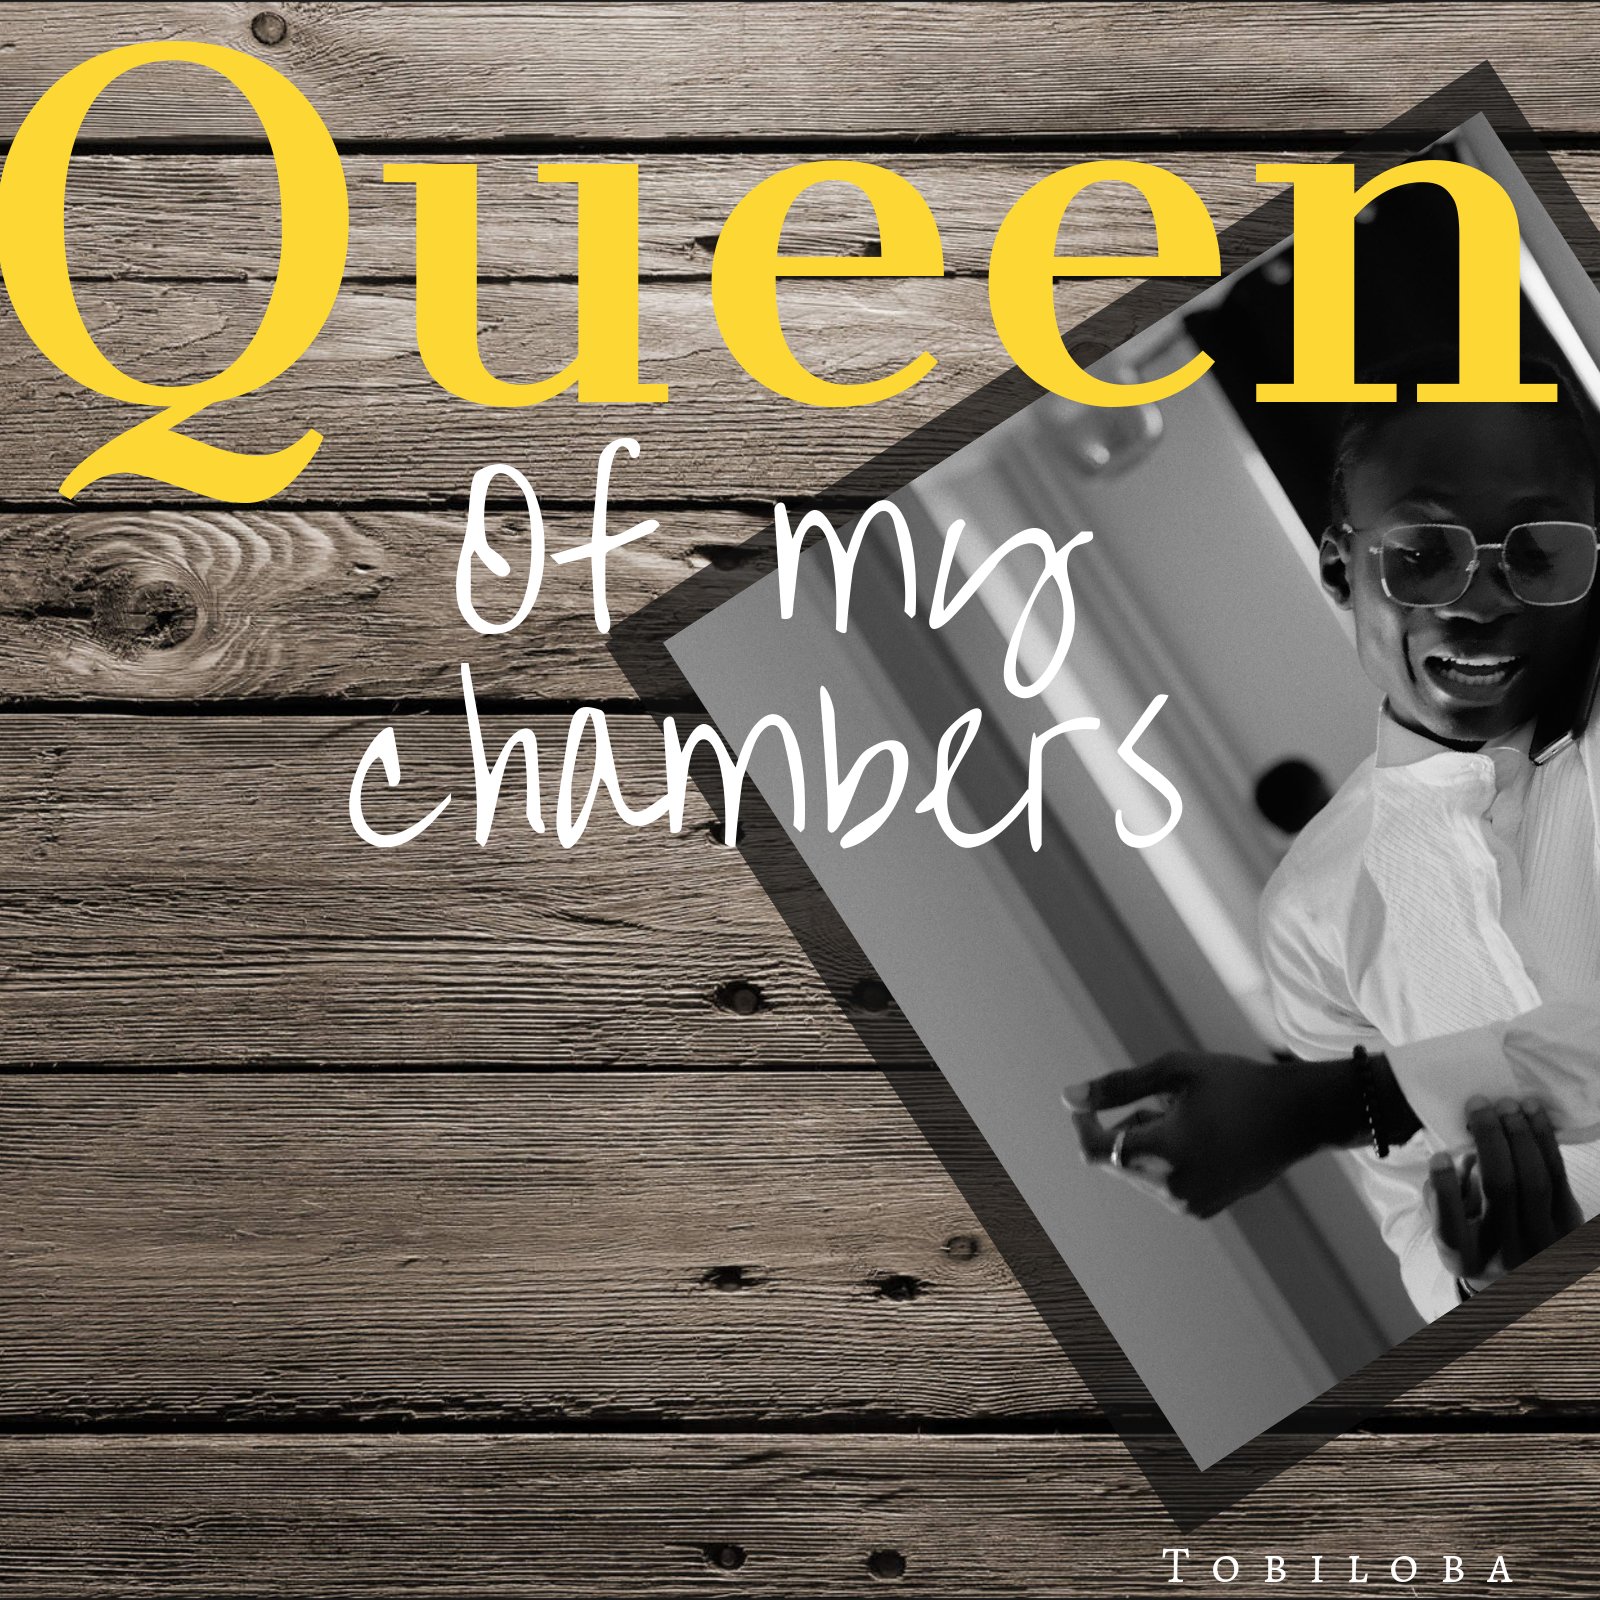 Contemporary Christian artiste, Tobiloba releases lovers anthem "Queen of my Chambers" | @it_is_tobiloba |